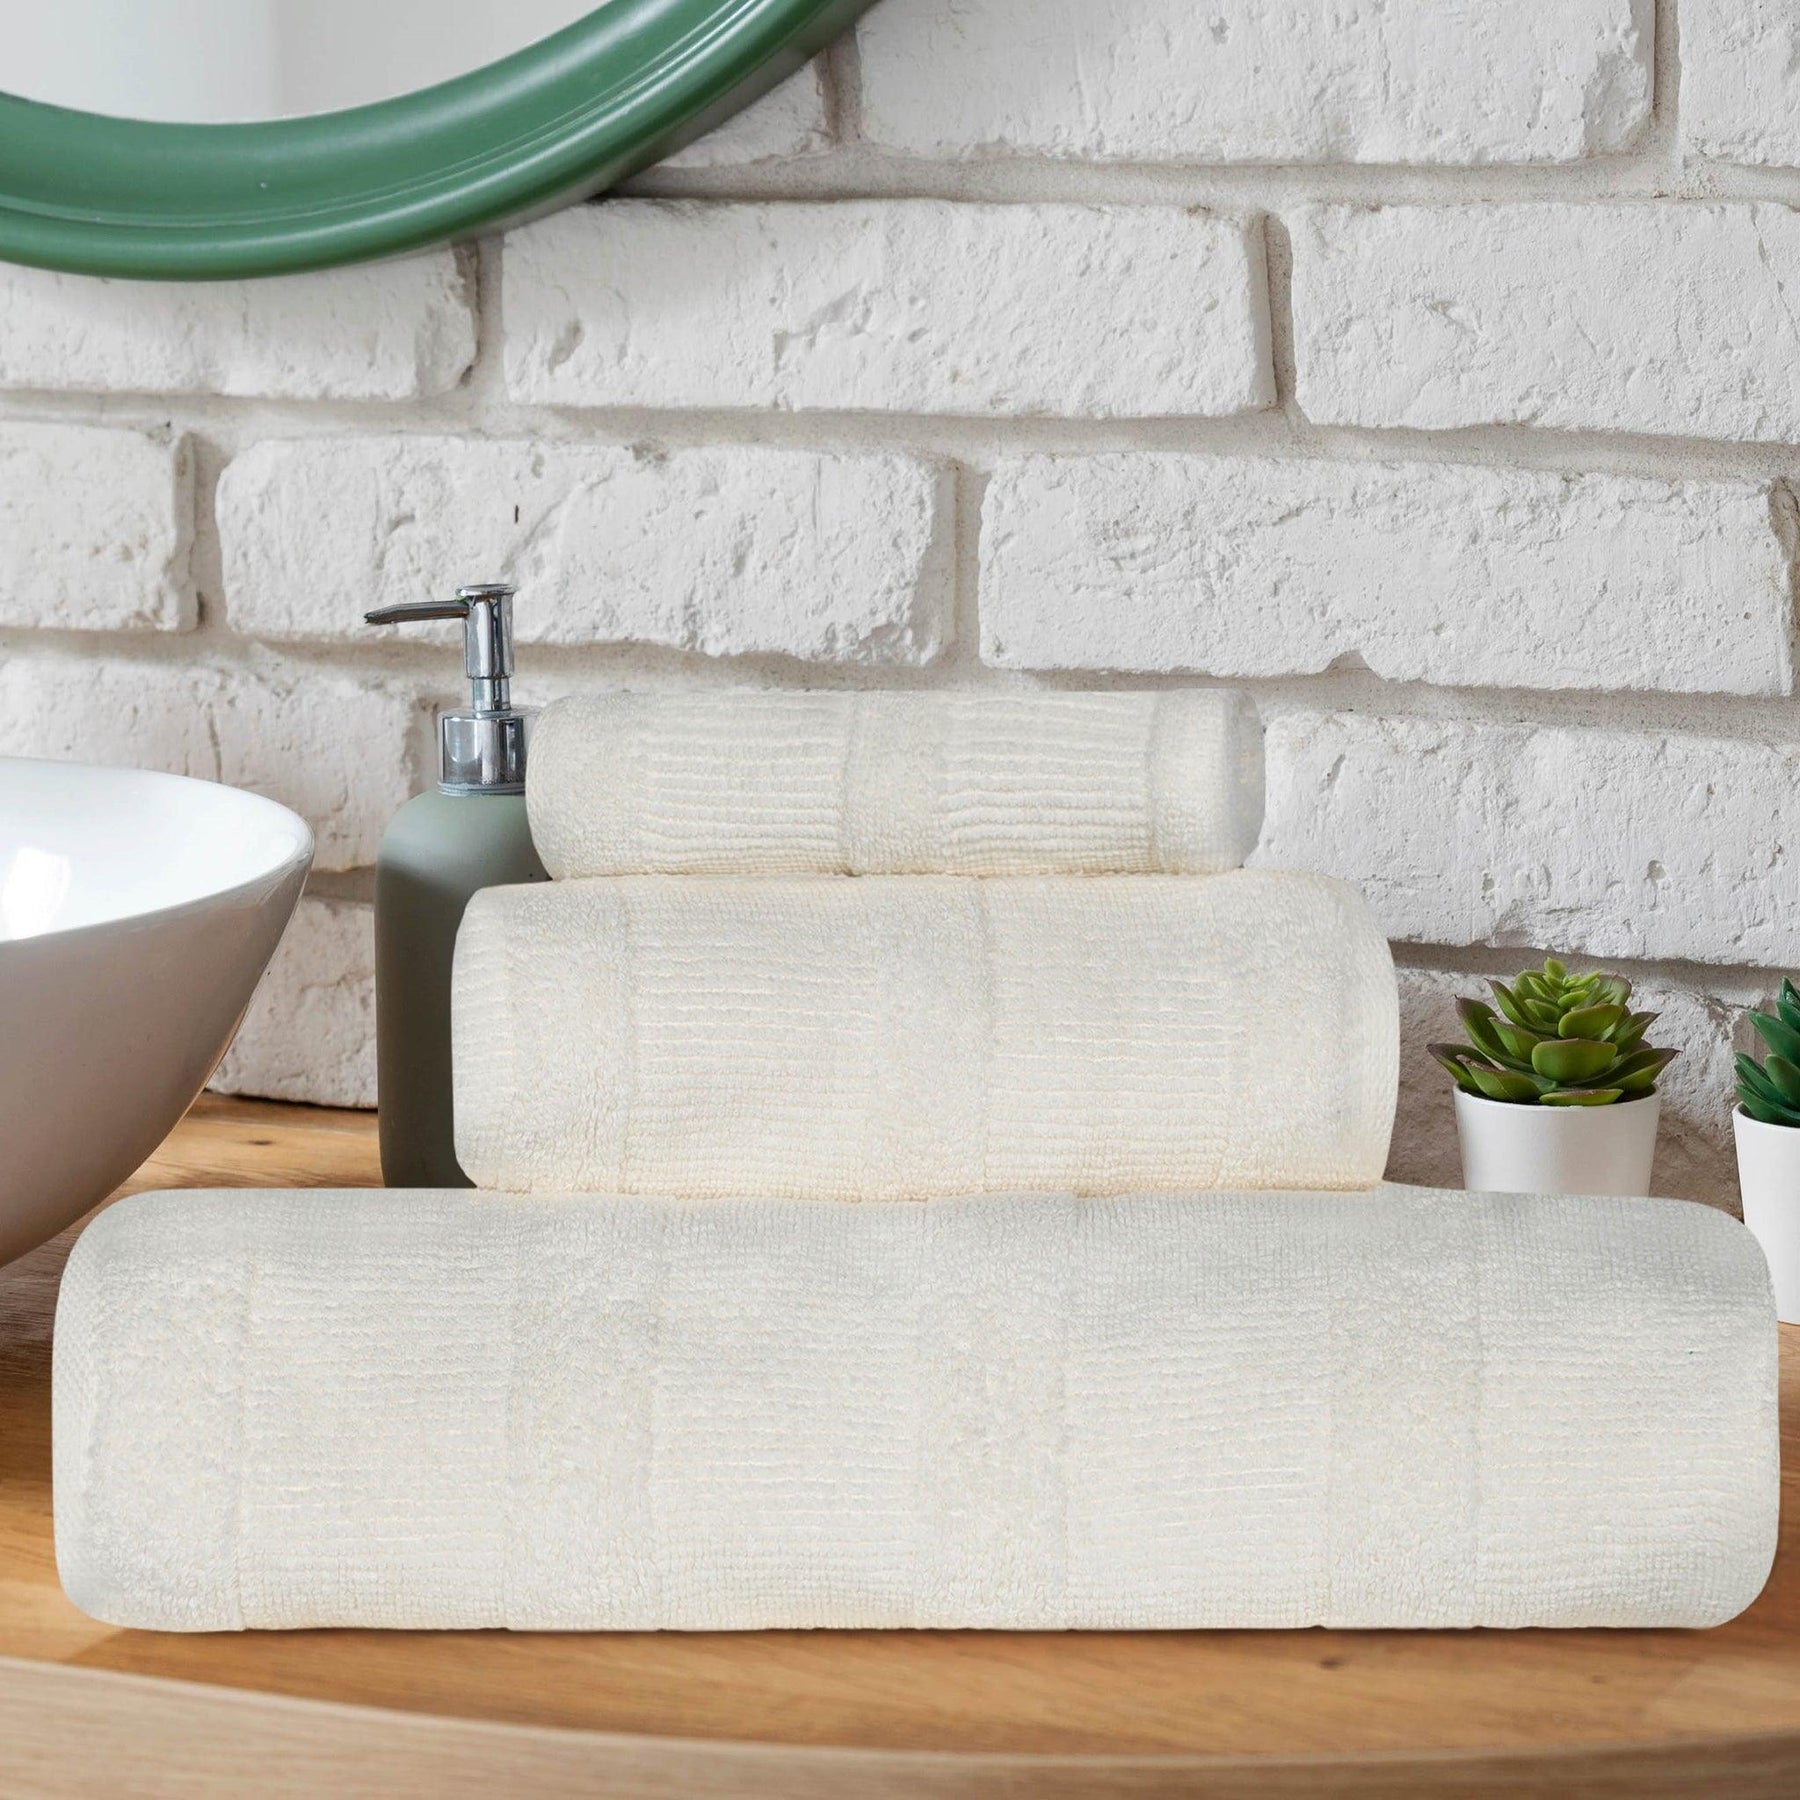 Ribbed Turkish Cotton 3-Piece Solid Quick-Dry Assorted Highly Absorbent Towel Set - Ivory